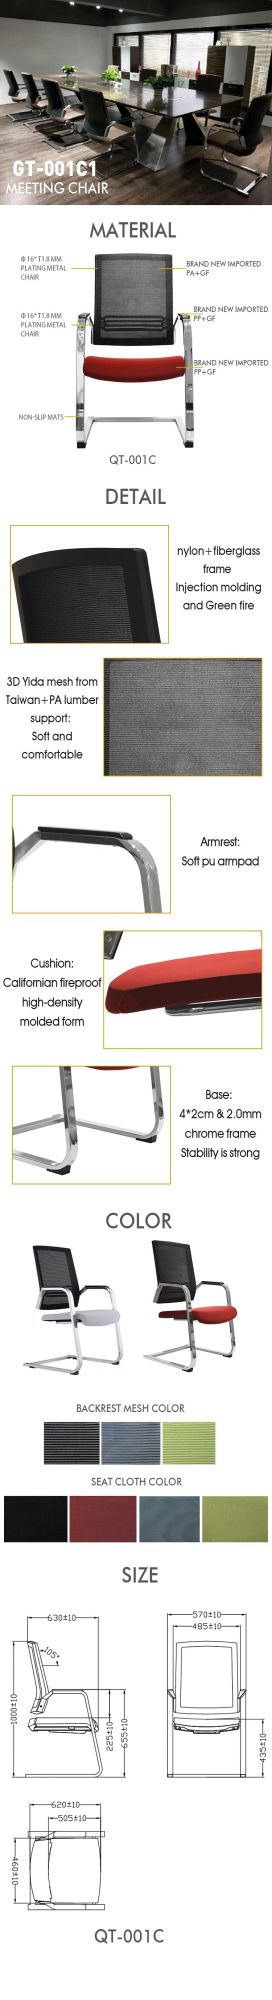 Stand Export Packing Metal Huy 74*59*63 Home Office Chairs Chair